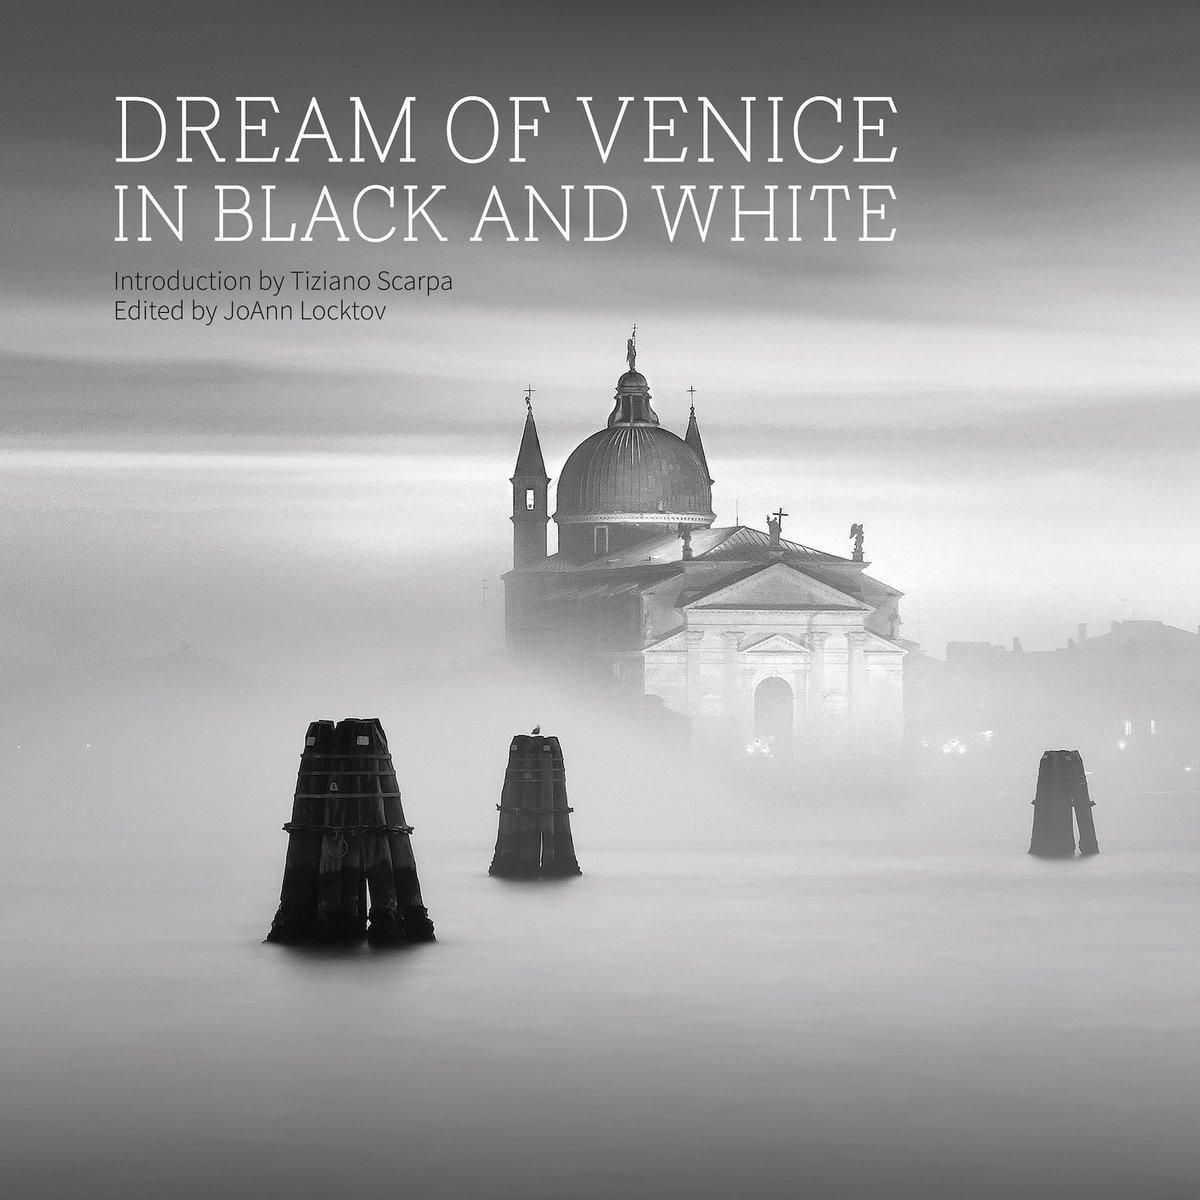 What are you reading while staying safe at home? We recommend DREAM OF VENICE IN BLACK AND WHITE “An enchanted  #Venice in black and white, like a dream. But this is really the authentic Venice, a dream-reality that we must love and defend.” http://bellafigurapublications.com/dream-venice-black-white/ #VeniceBooks